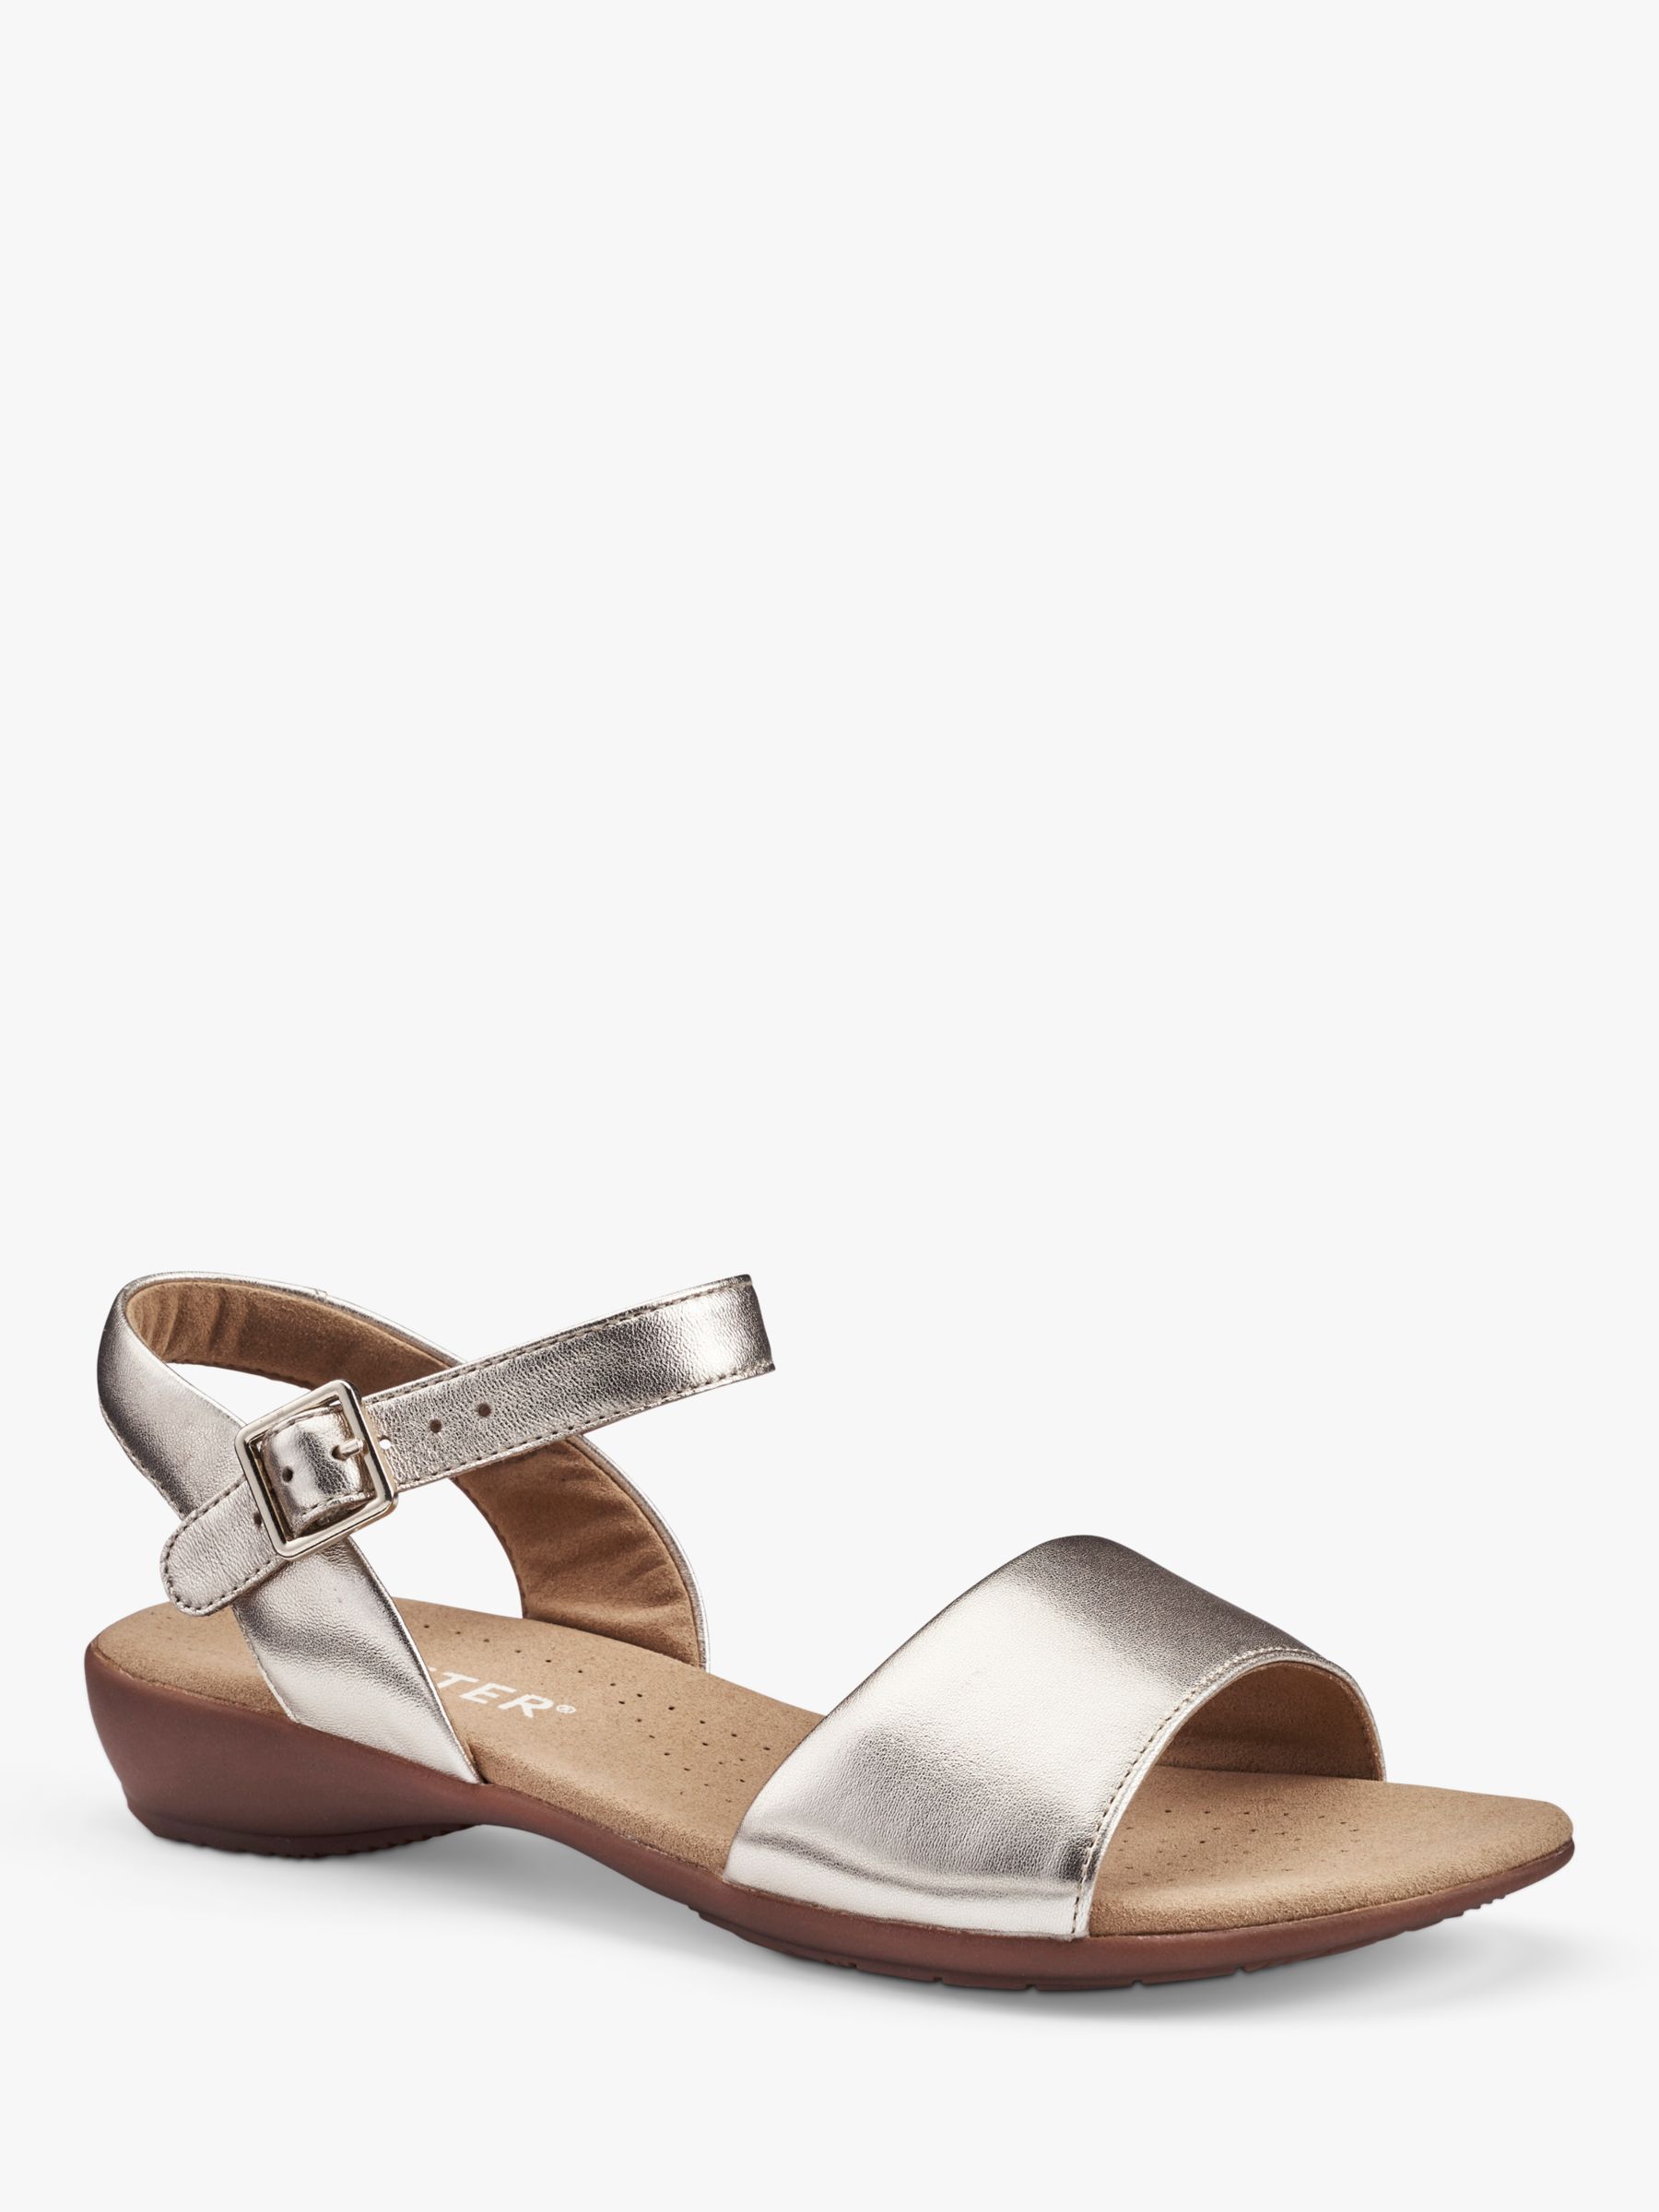 Buy Hotter Tropic Classic Leather Sandals Online at johnlewis.com